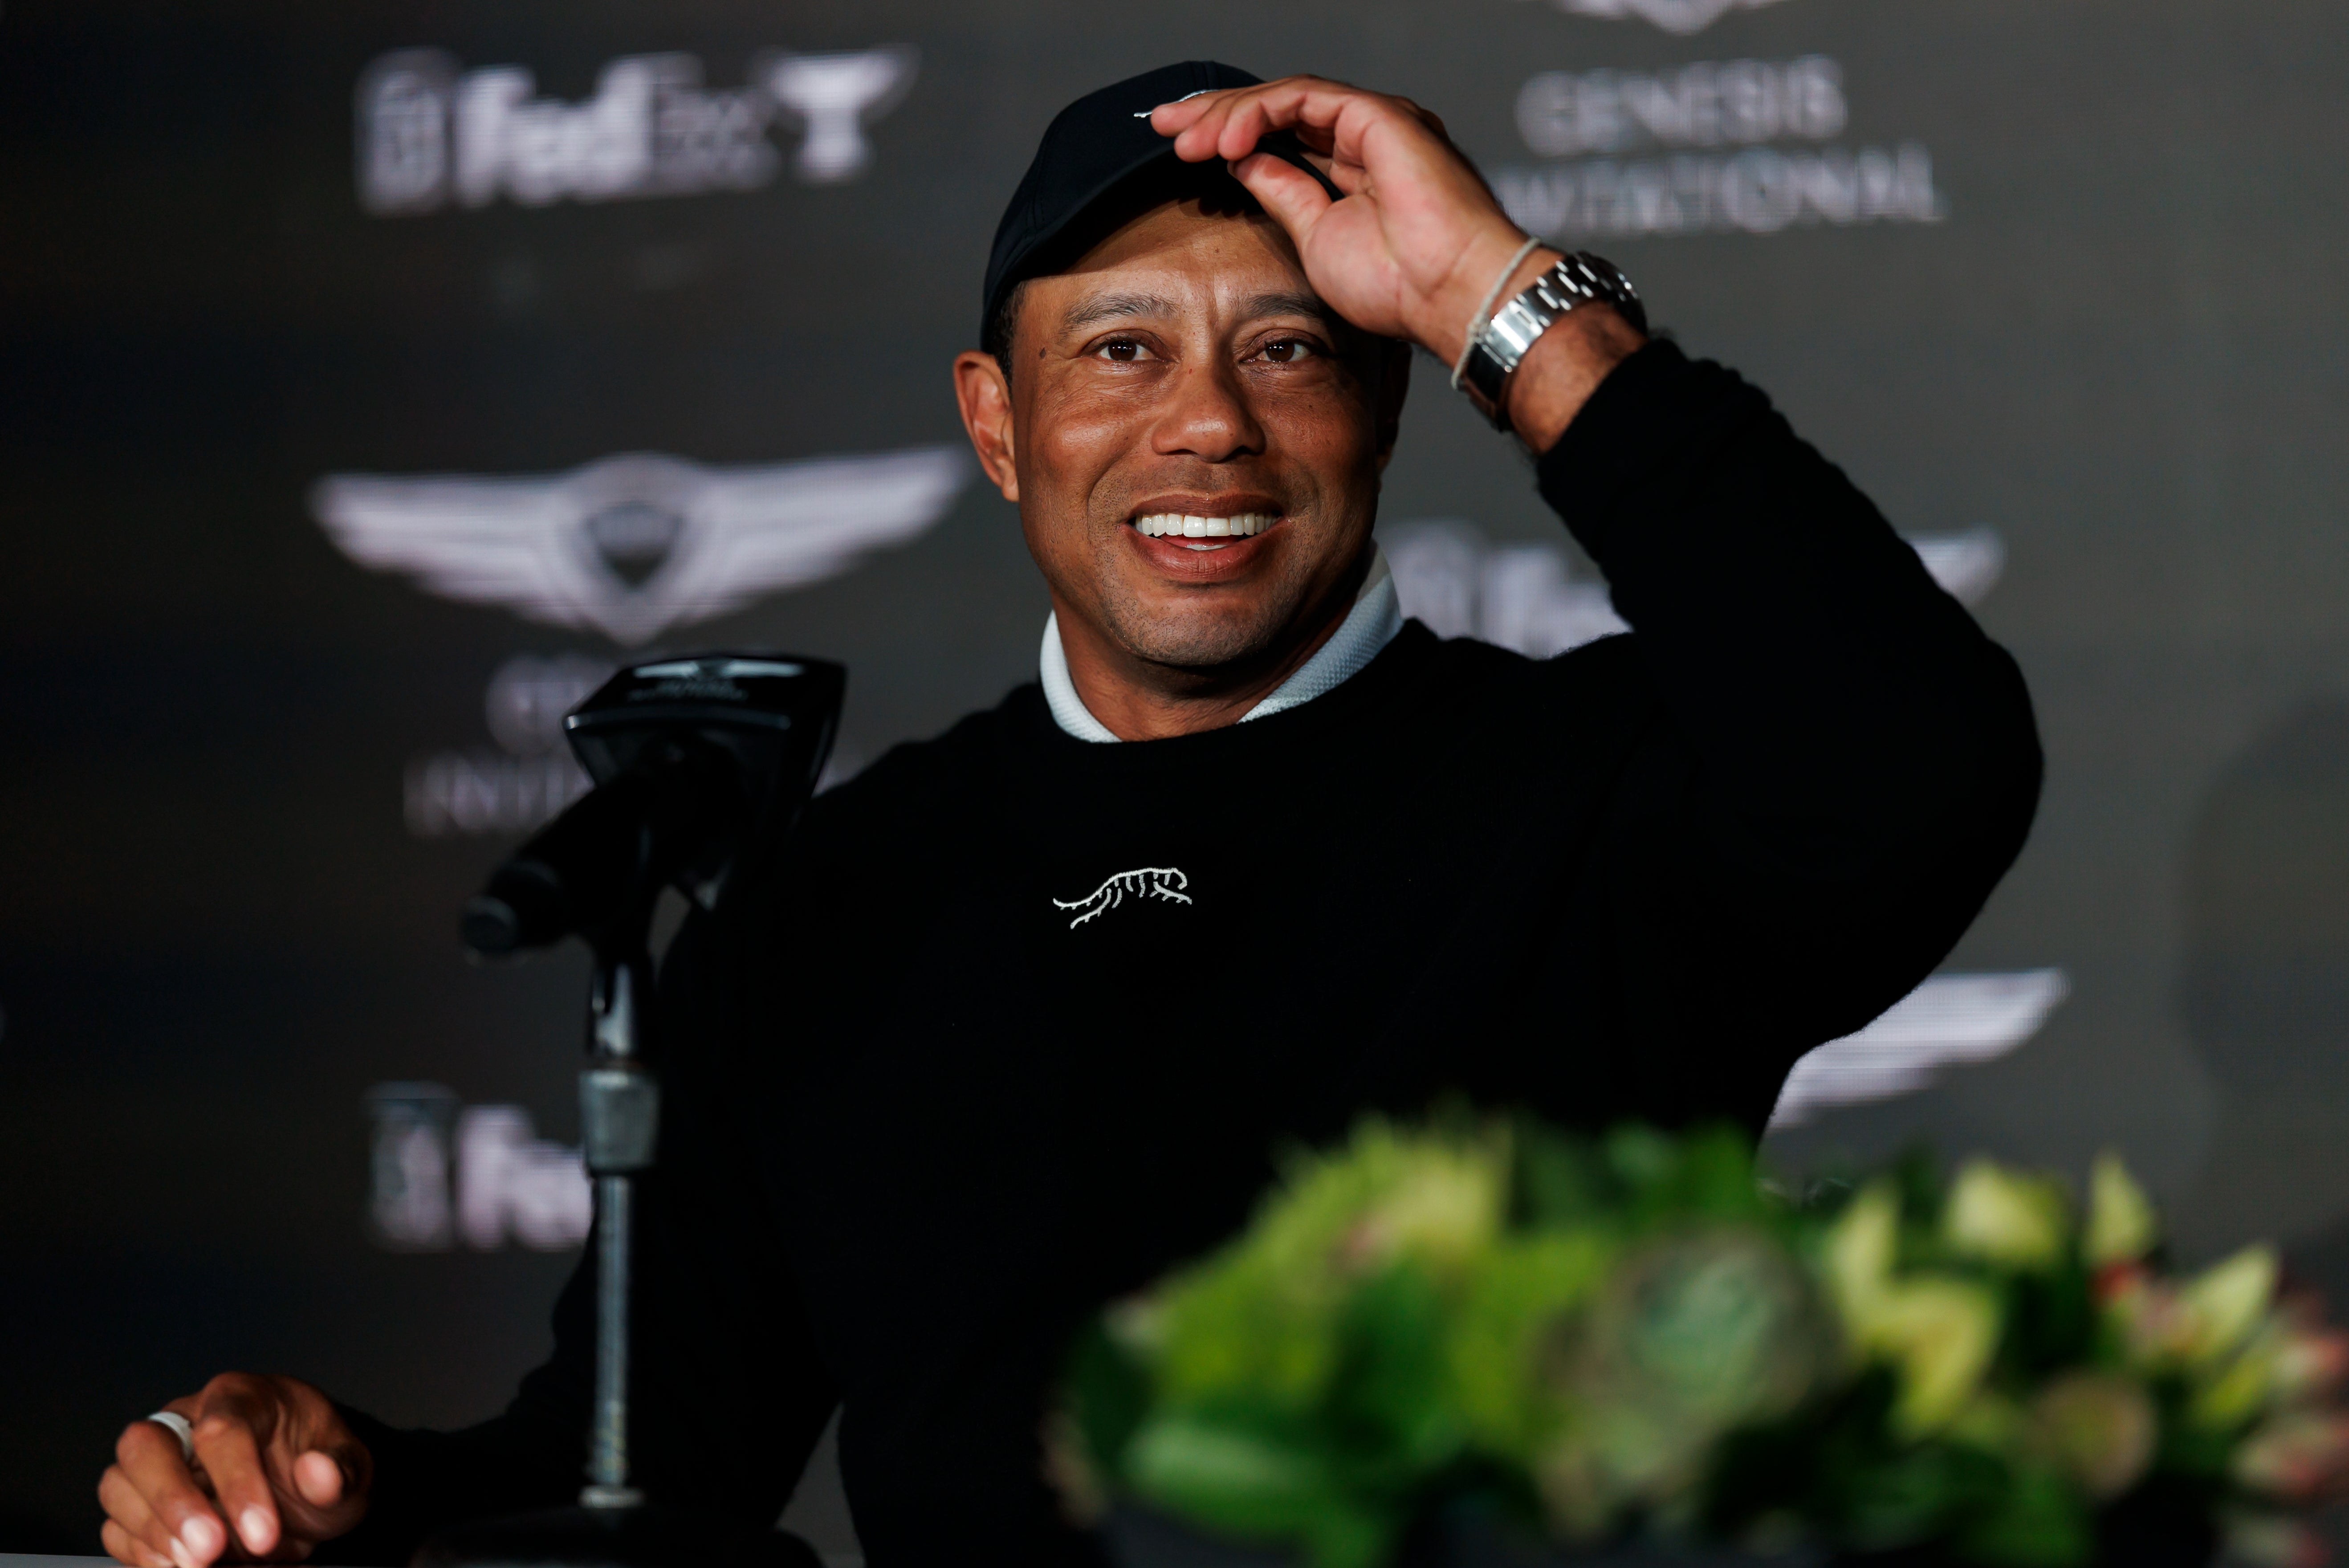 Tiger Woods is back in action at the Genesis Invitational this week